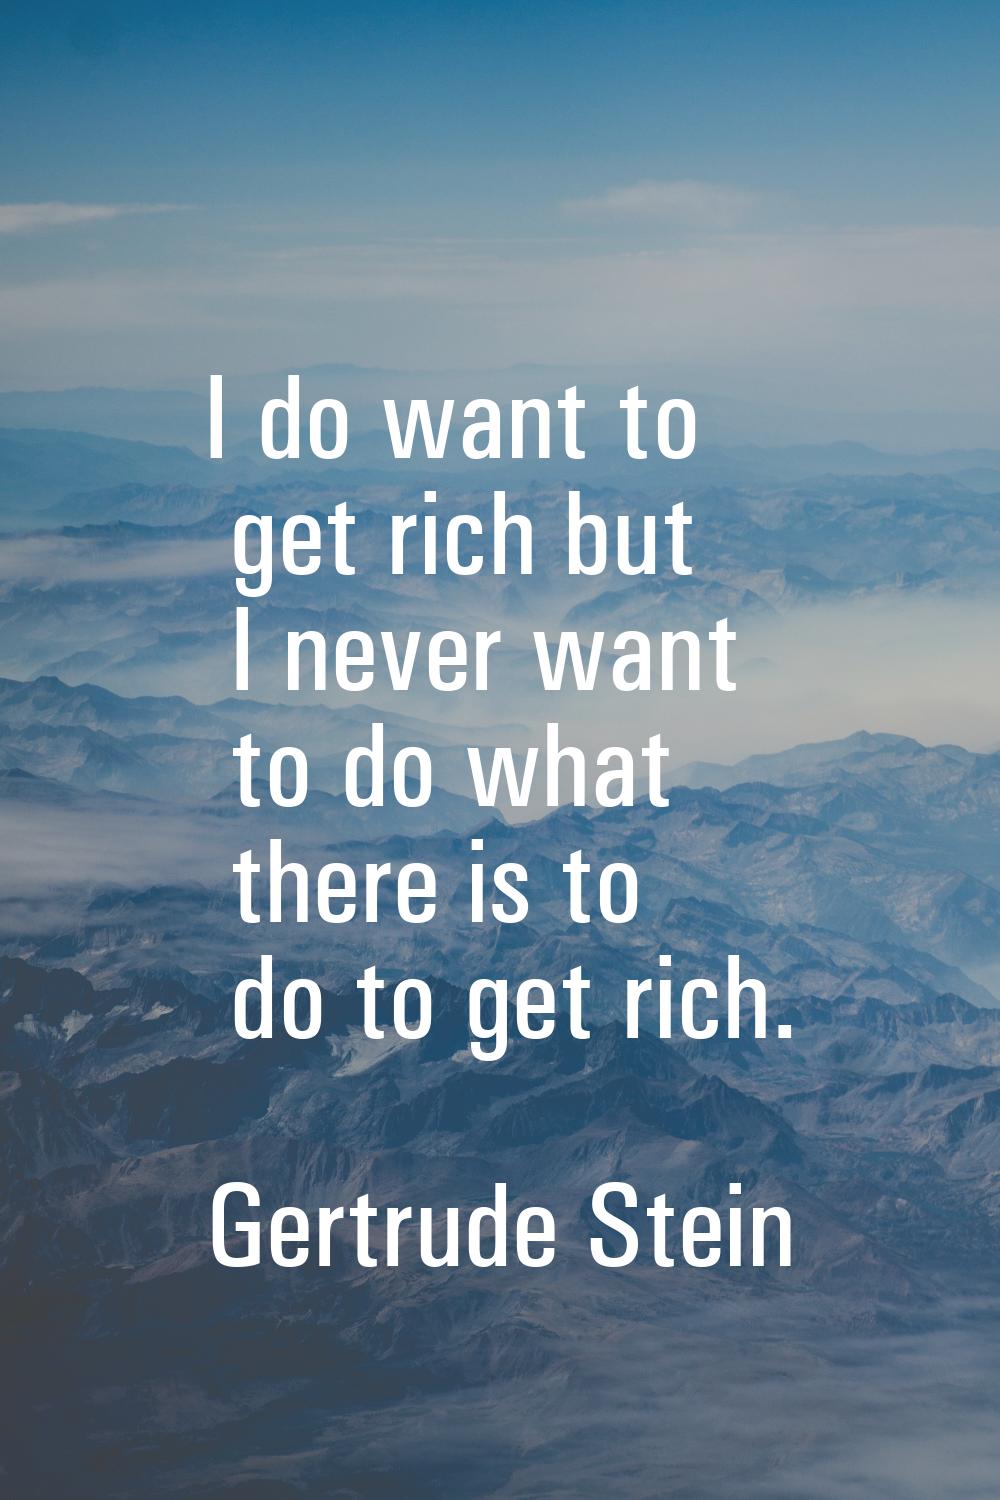 I do want to get rich but I never want to do what there is to do to get rich.